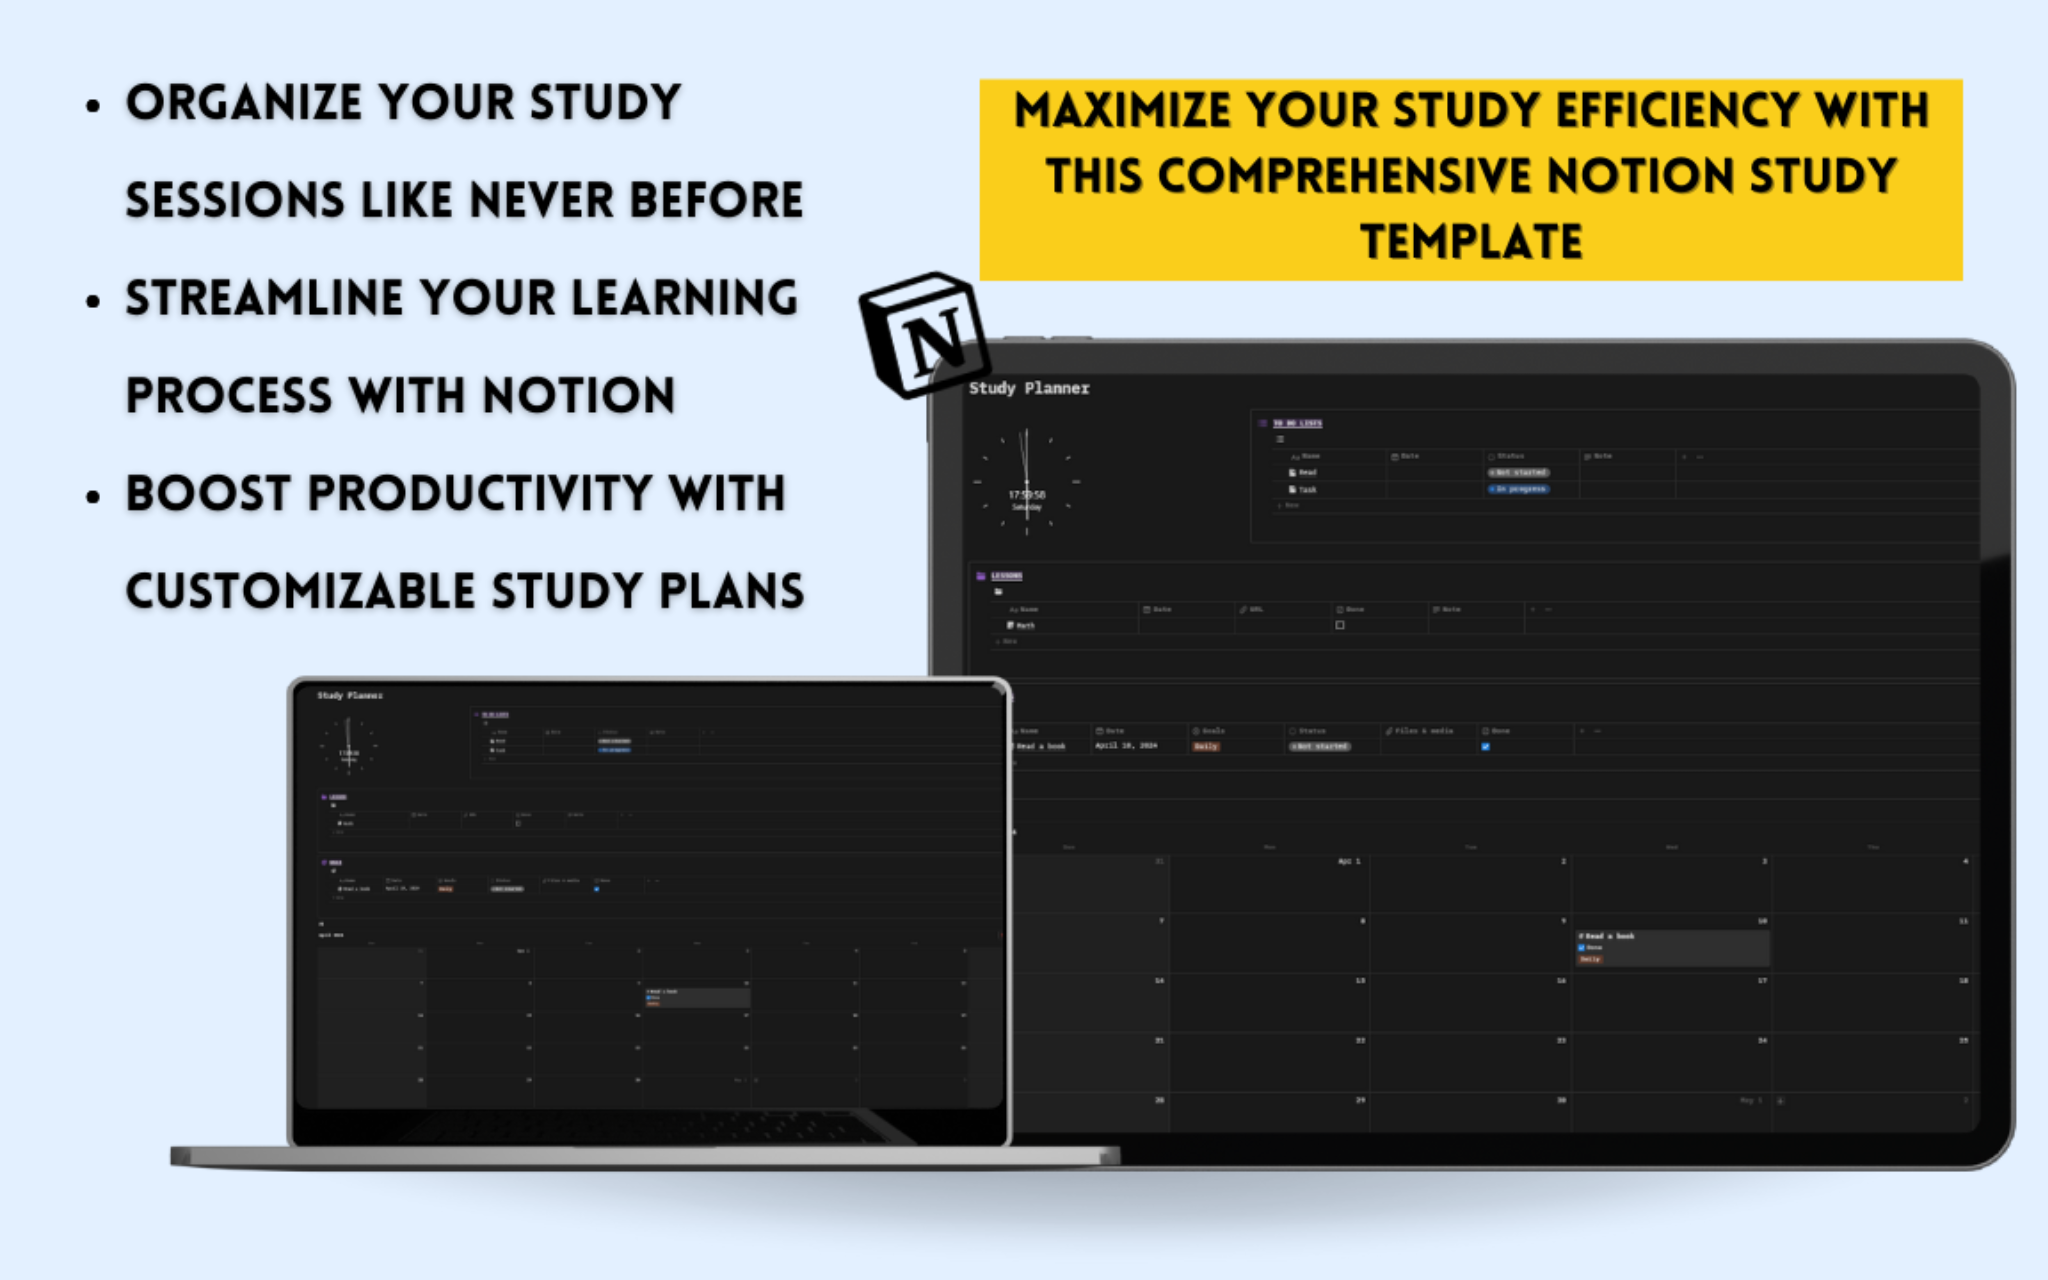 Elevate your student life with our top-rated study planner. Organize class notes, manage student org activities, and achieve academic success effortlessly with our student planner.